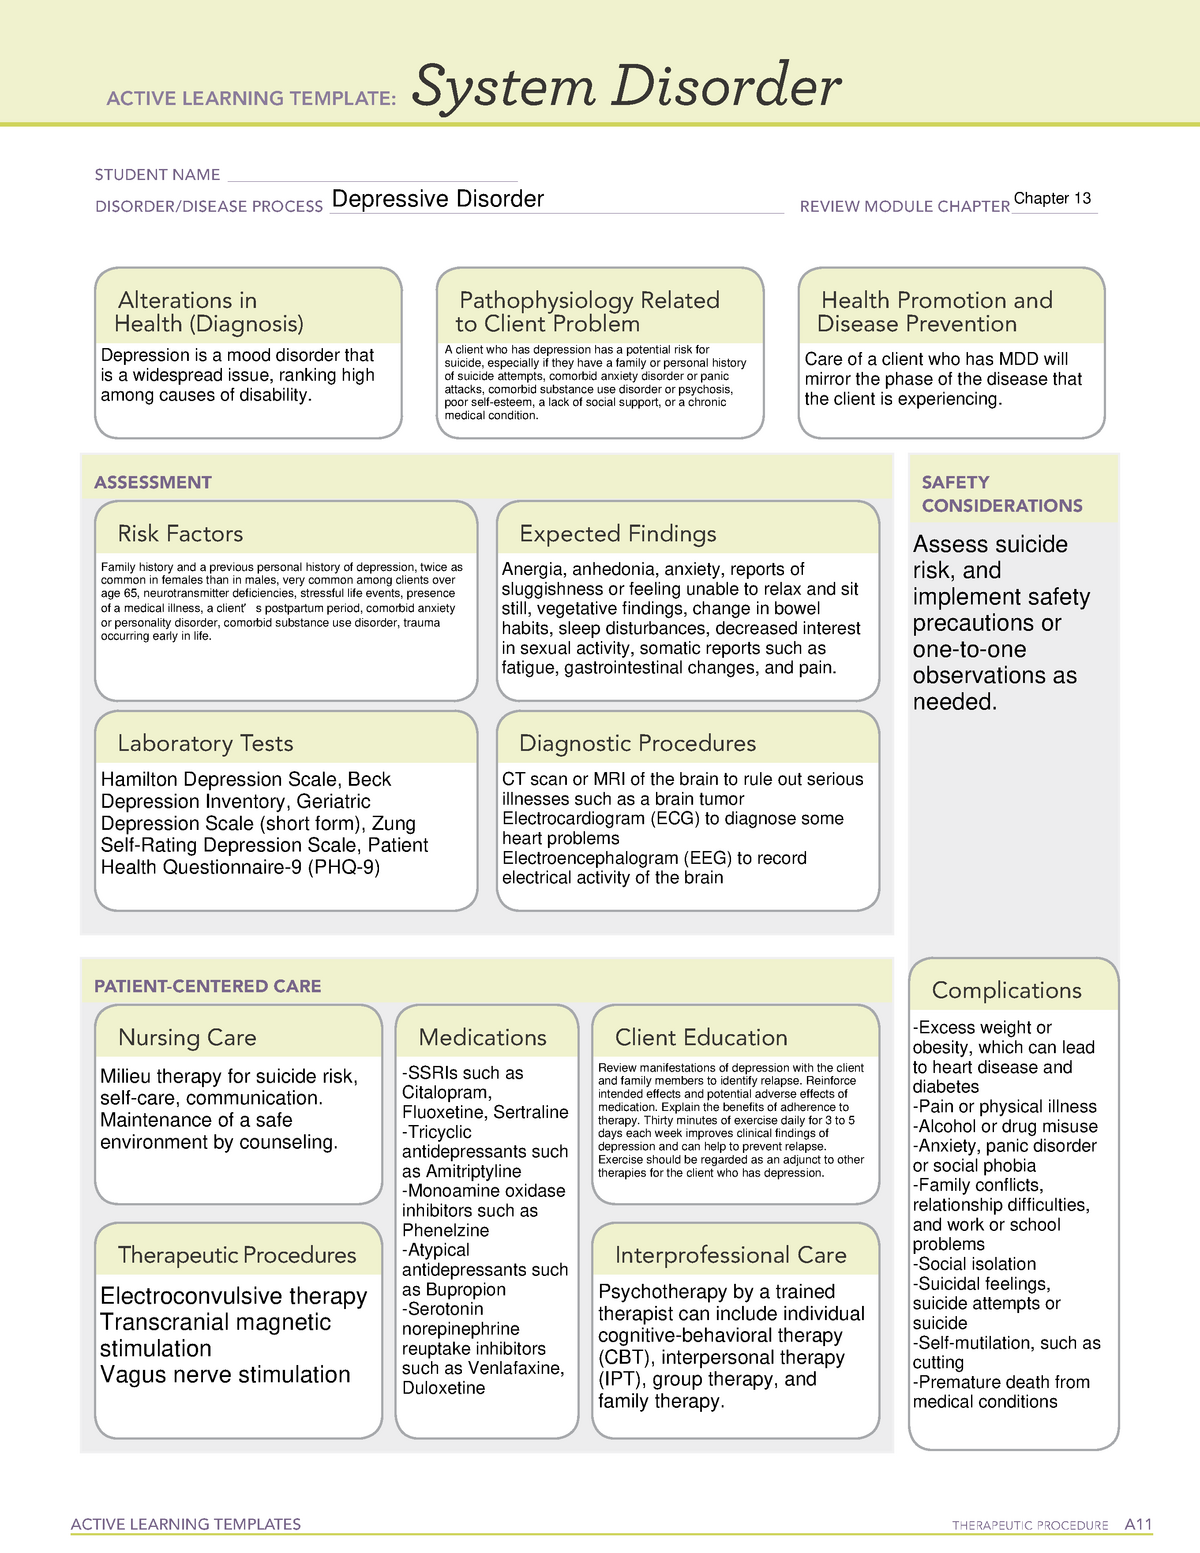 Ati System Disorder Template Active Learning Template vrogue co